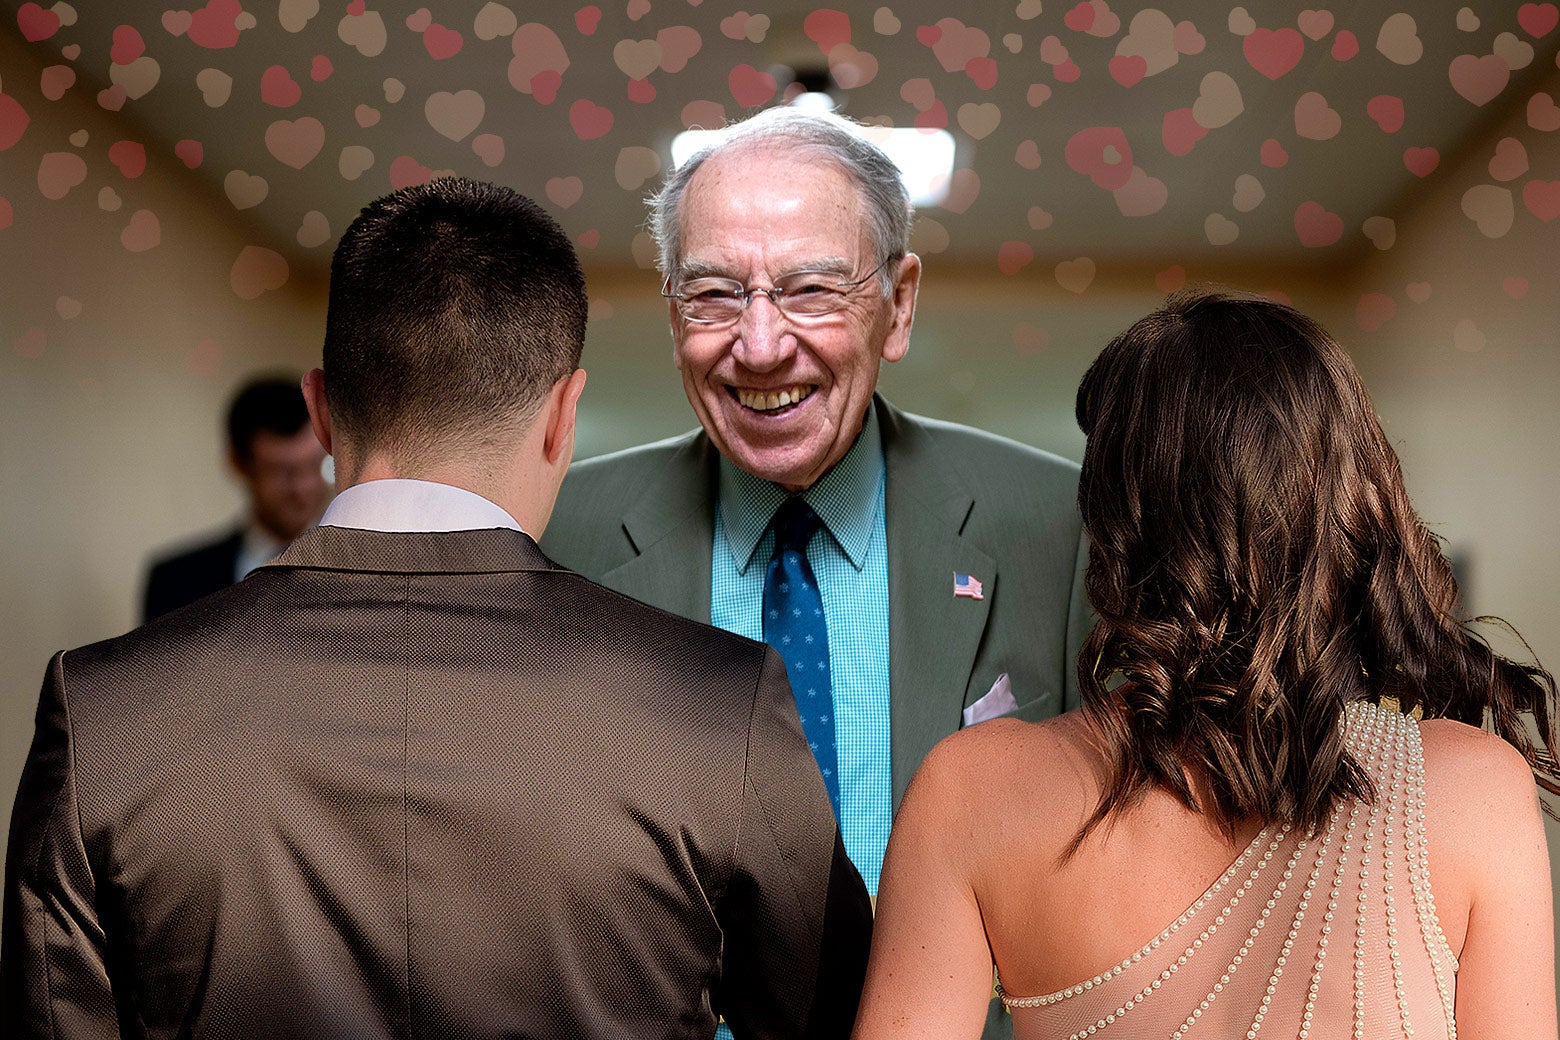 A smiling Chuck Grassely presiding over the marriage of one of his staffers. 